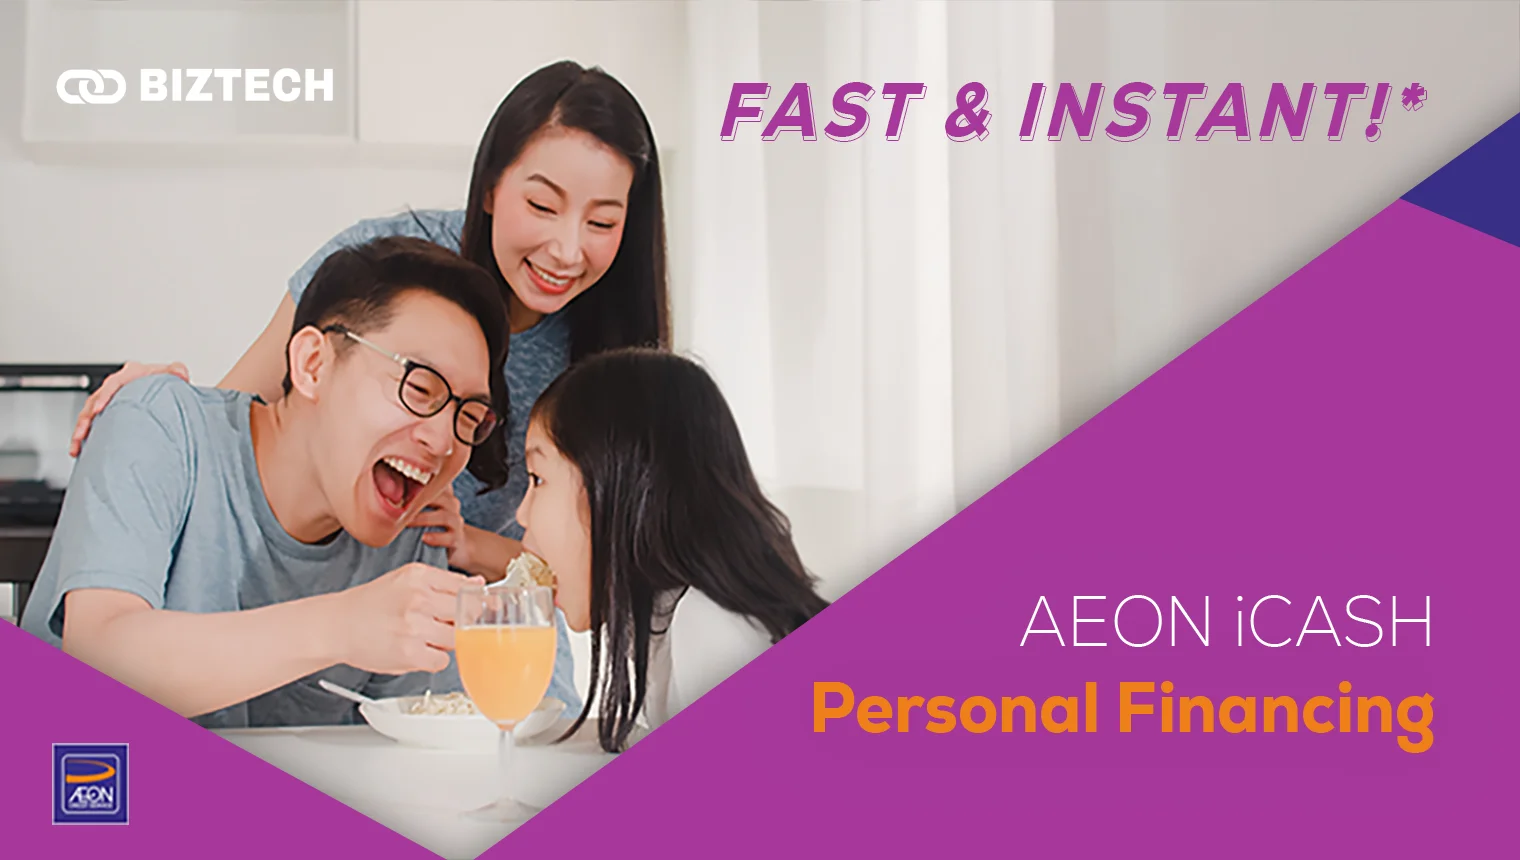 AEON iCASH Personal Financing: Express Approval for Fast Cash